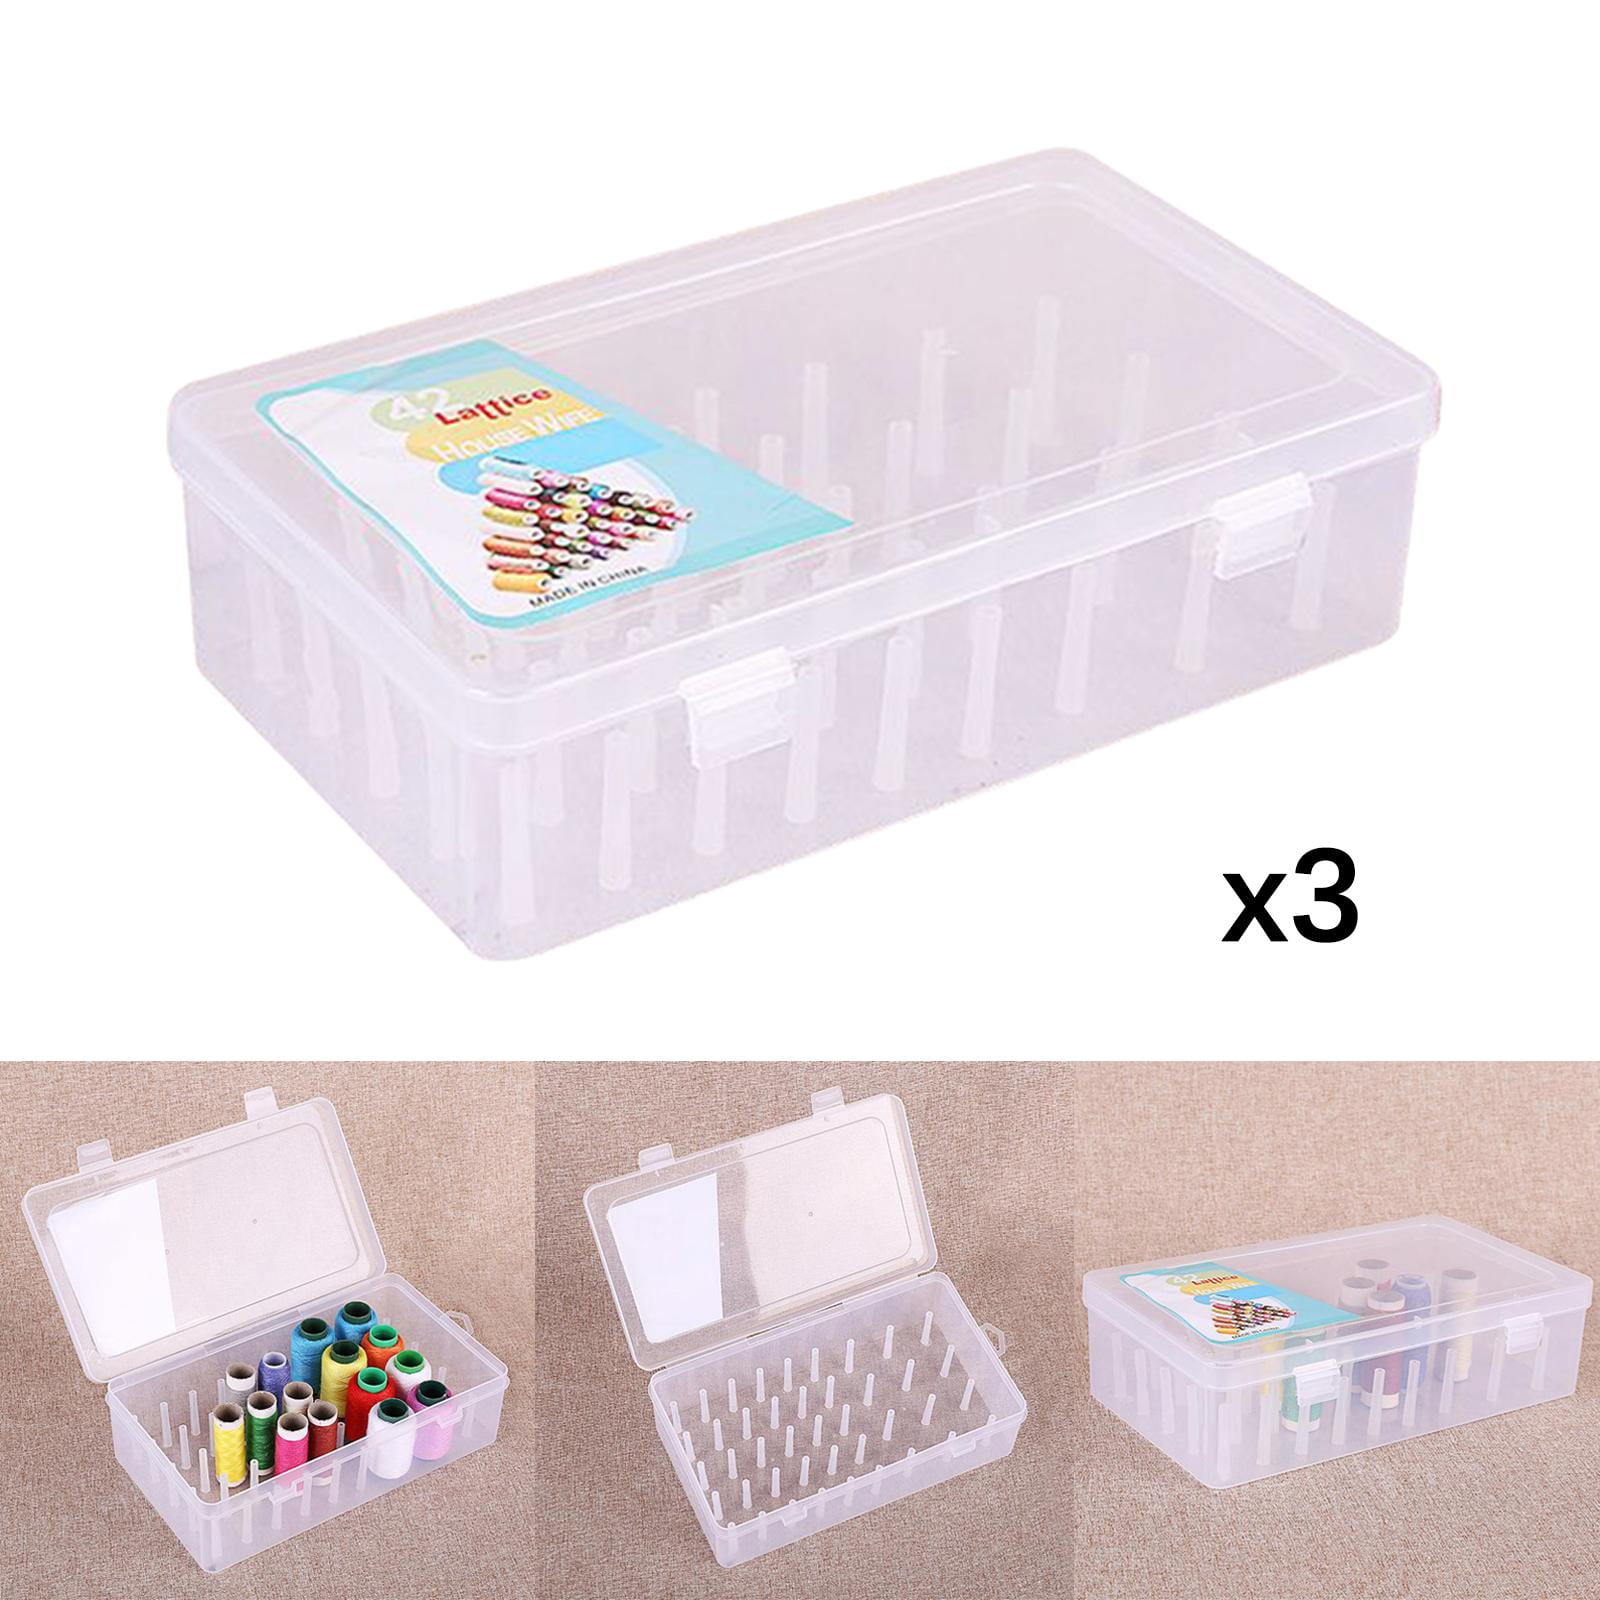 2x 42 Slots Large Capacity Sewing Thread Holders for Spools of Thread,  Empty Thread Storage Box, Made of High-Quality Materials, storage 